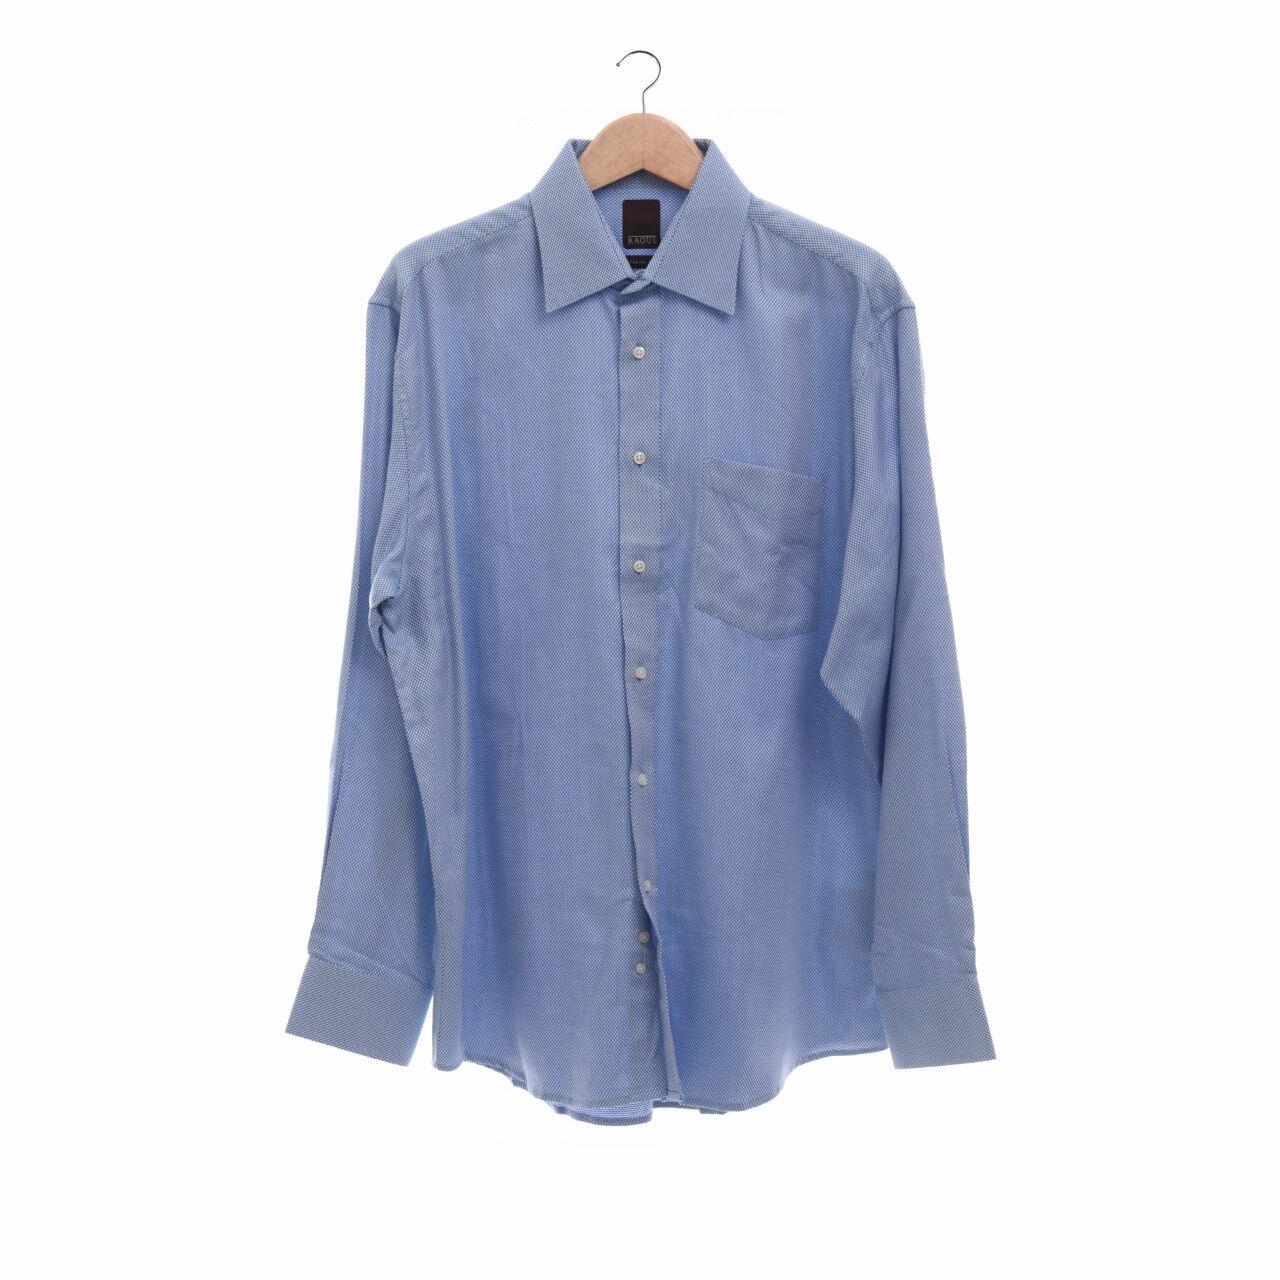 Raoul Blue & White Loose Fit Shirt